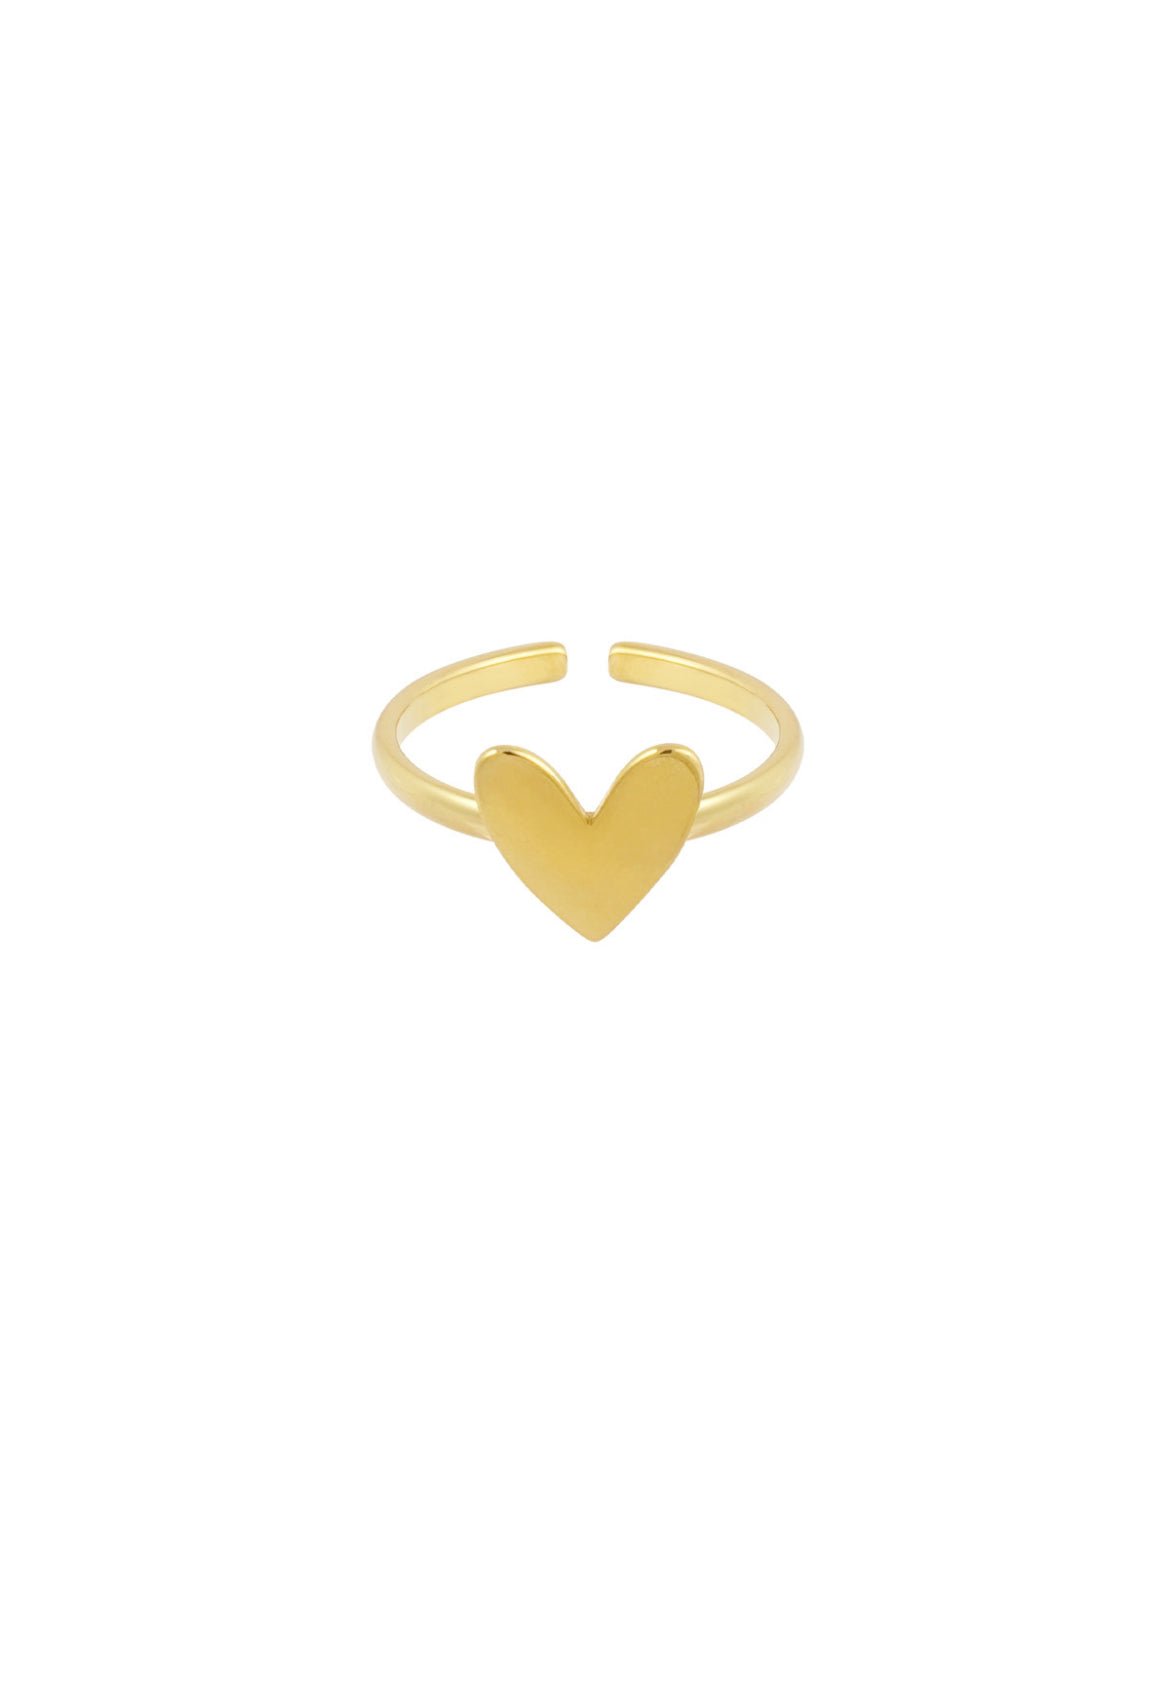 CLASSIC LOVE RING - My Favourites